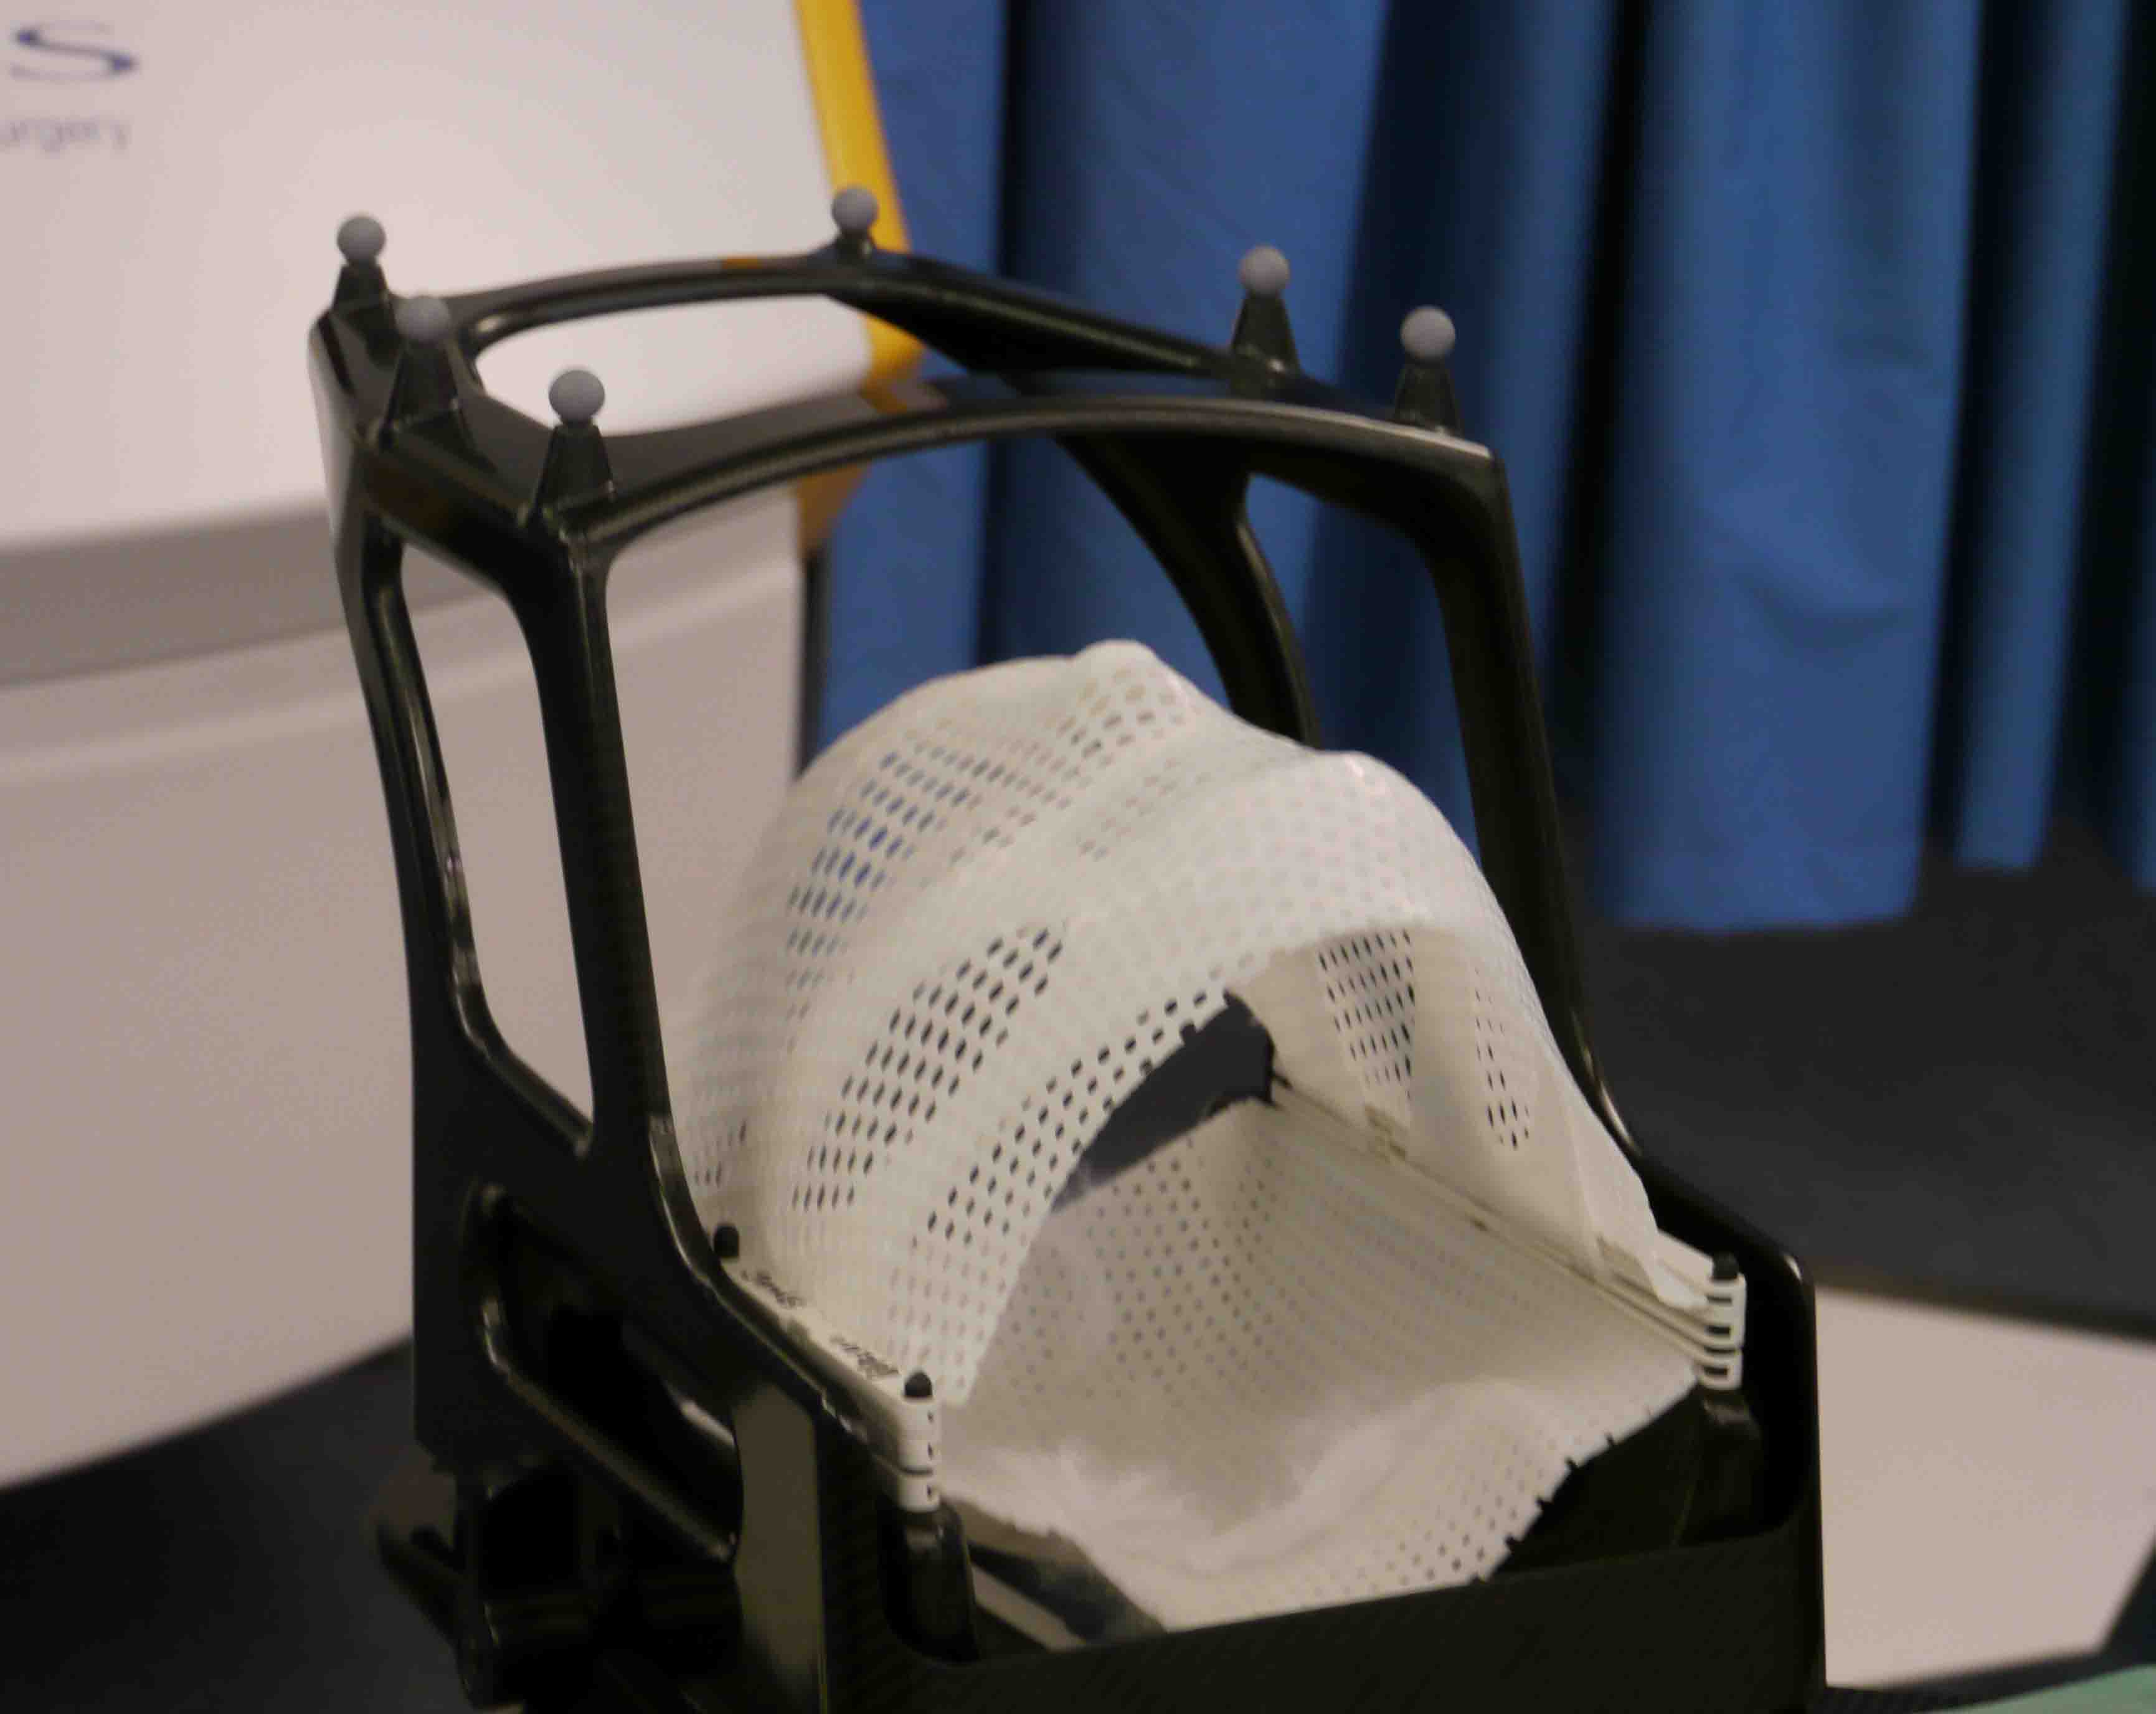 Typical Radio Surgery Face Masks used for Acoustic Neuroma treatment